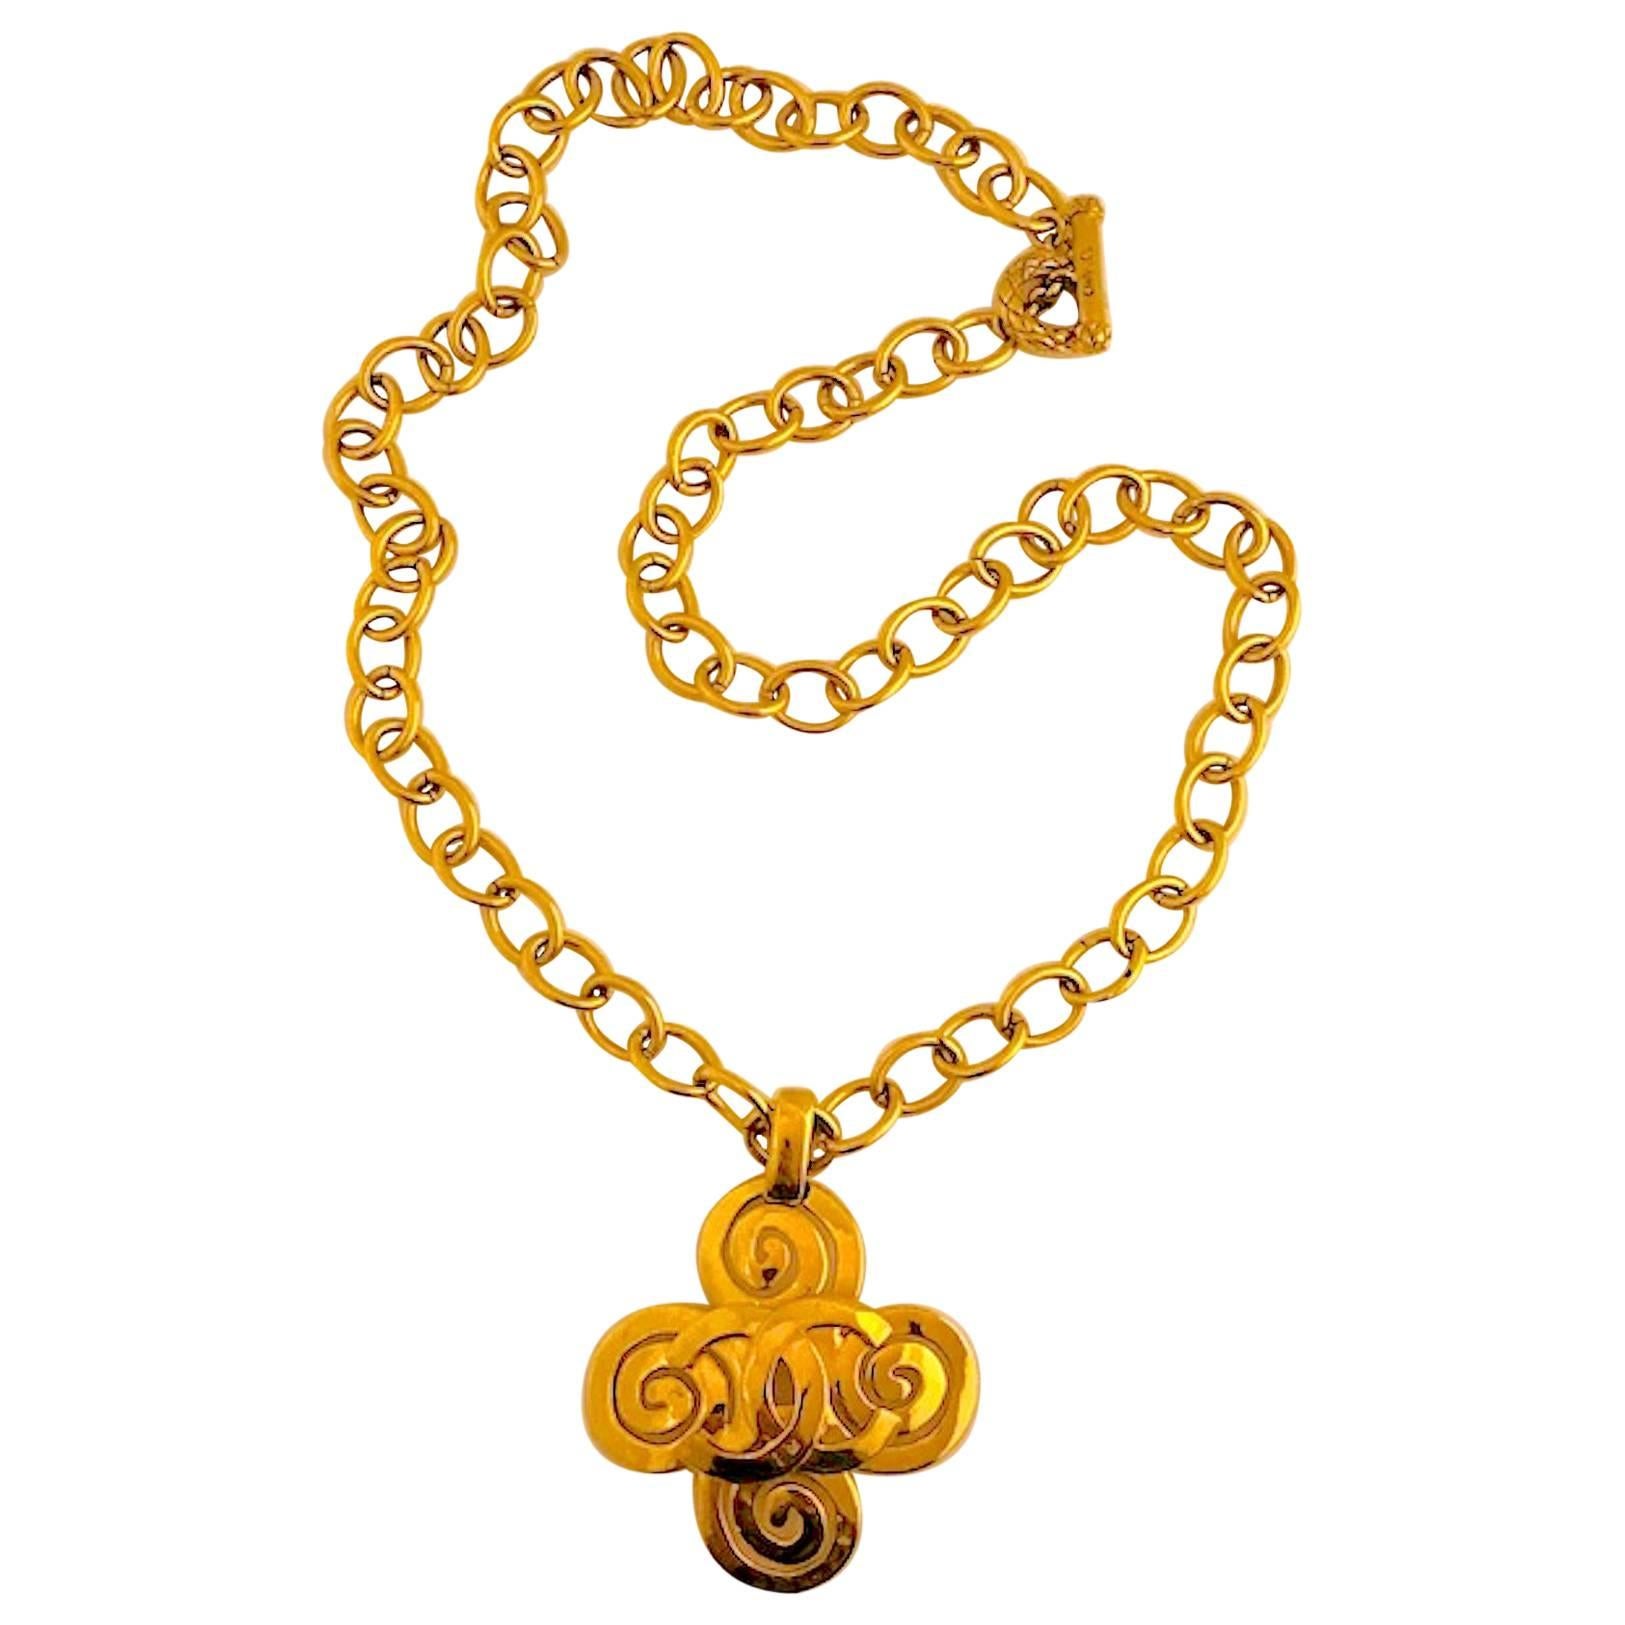 Chanel Large Pendant Necklace Spring 1995 Collection